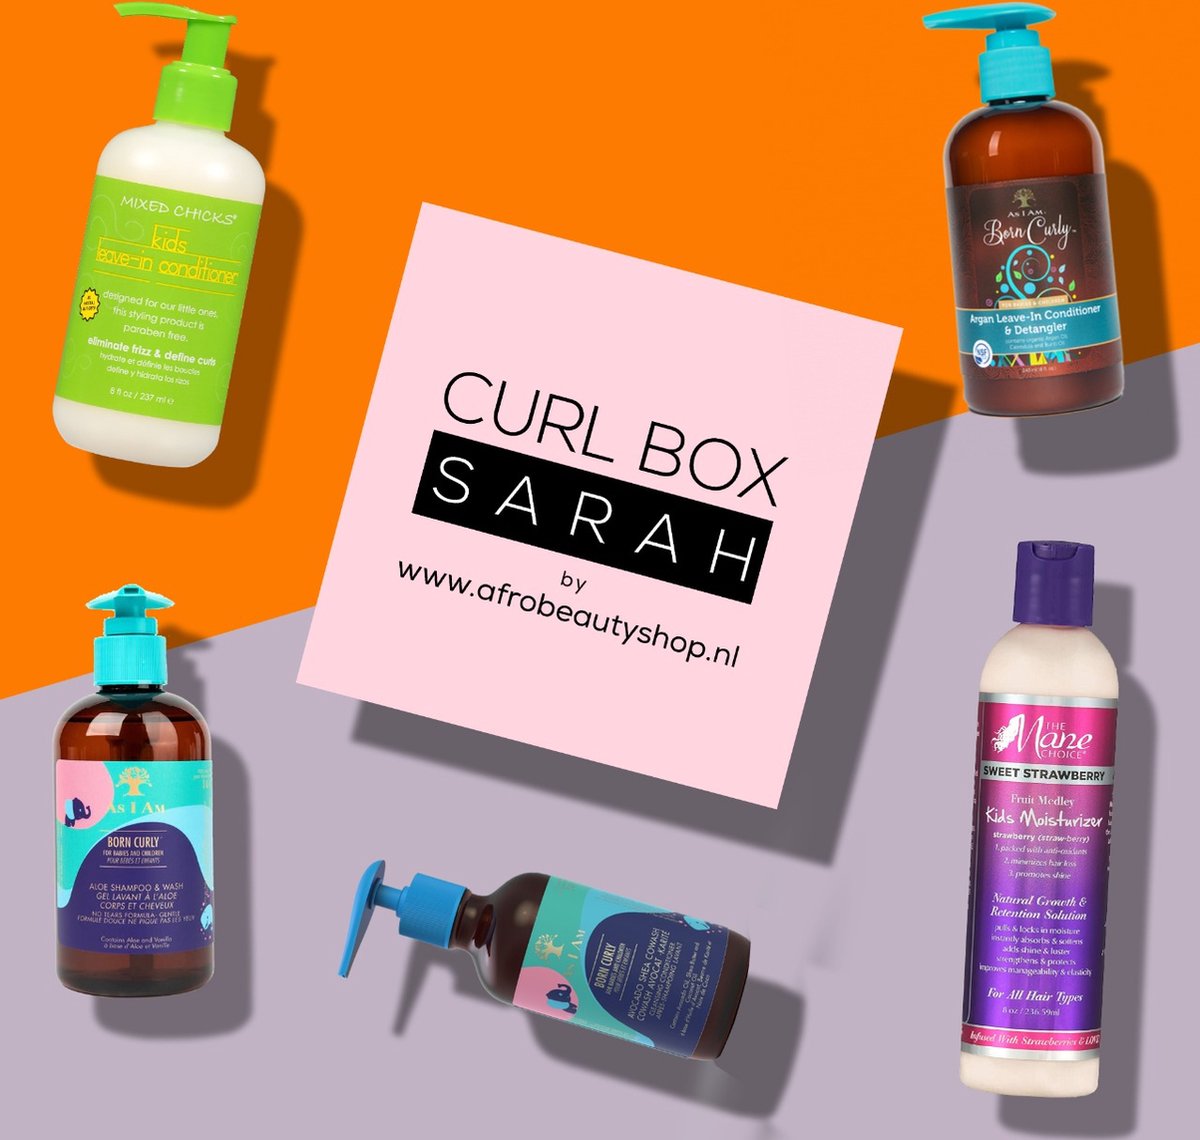 Curl Box SARAH for Kids. by afrobeautyshop.nl